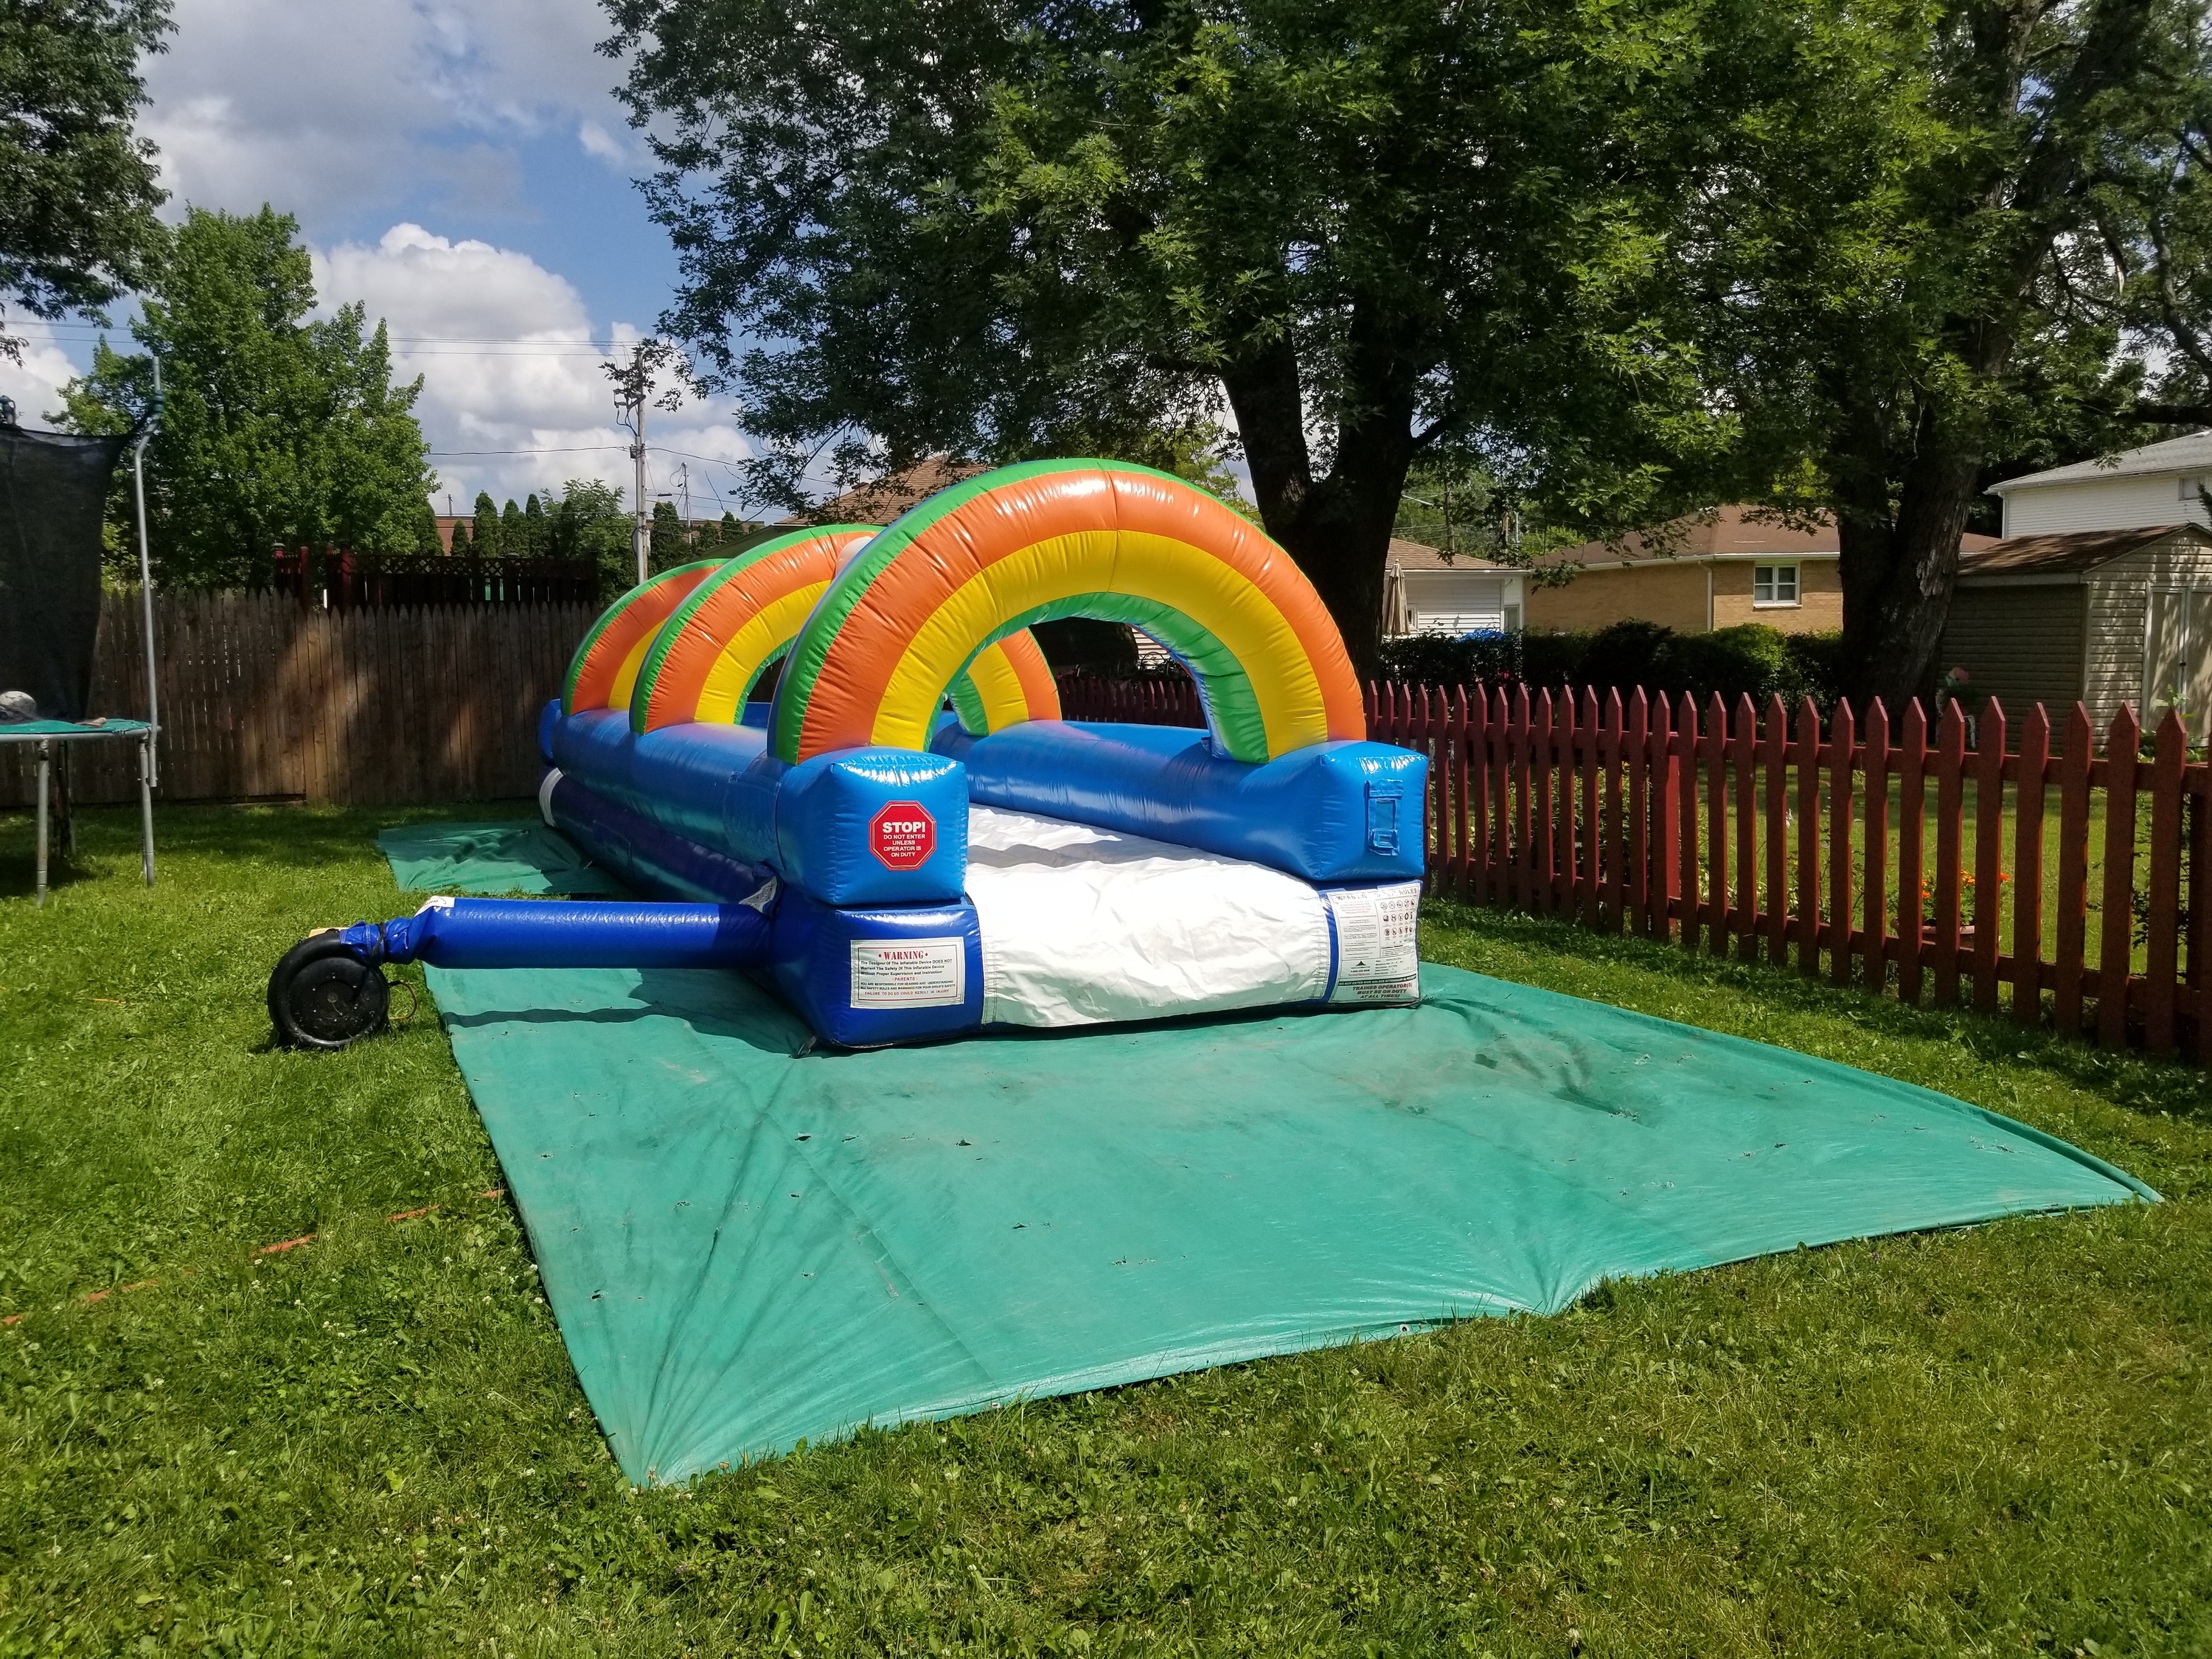 Rainbow arched 30 foot long slip and slide rental for a high school graduation party